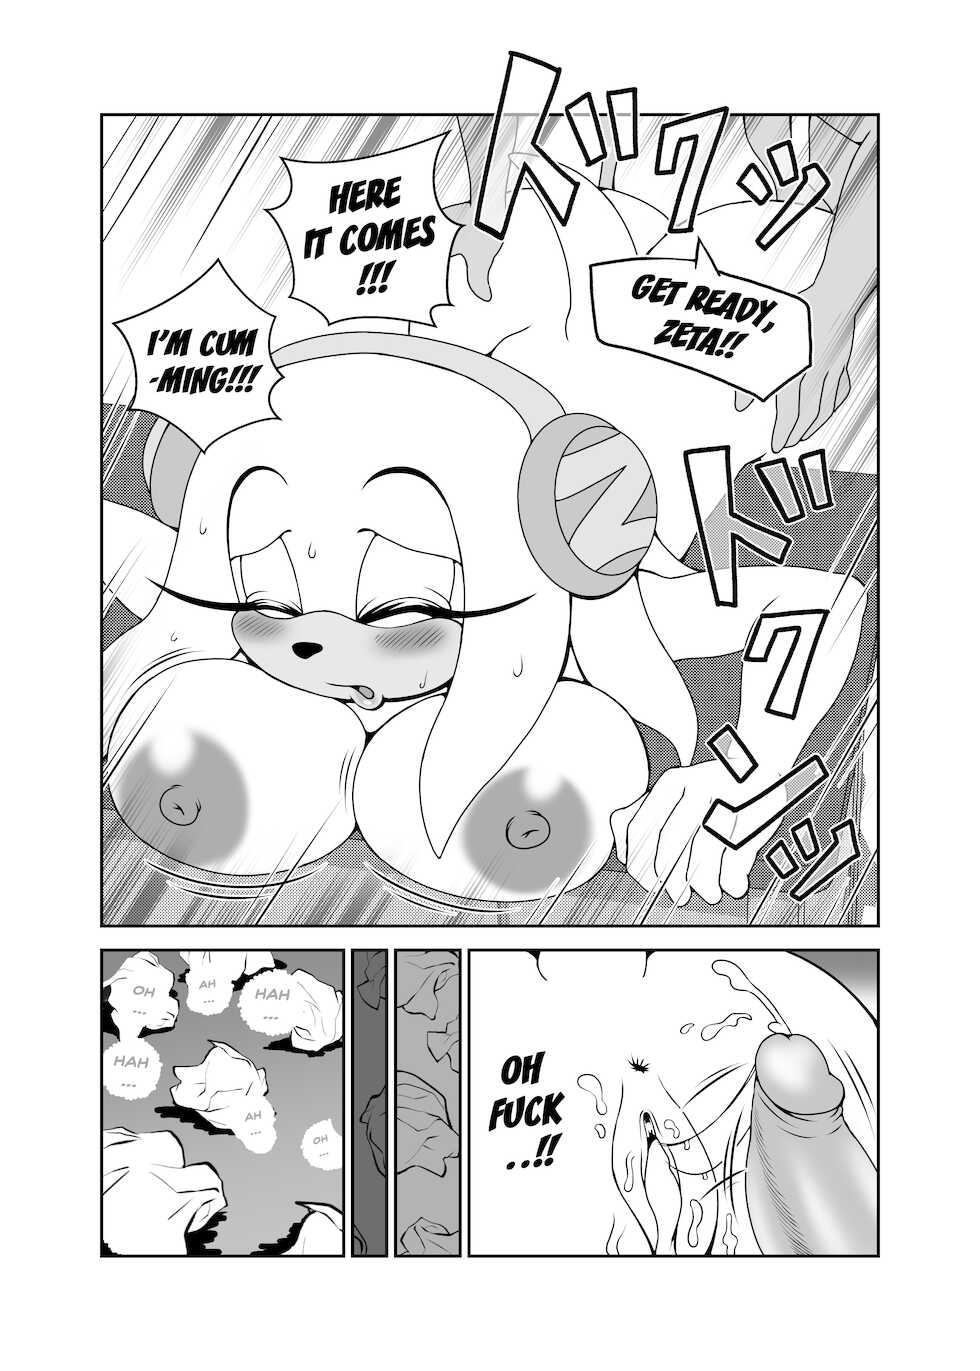 [Michiyoshi] Canned Furry Gaiden 4 (Sonic The Hedgehog) [Revised English] - Page 4